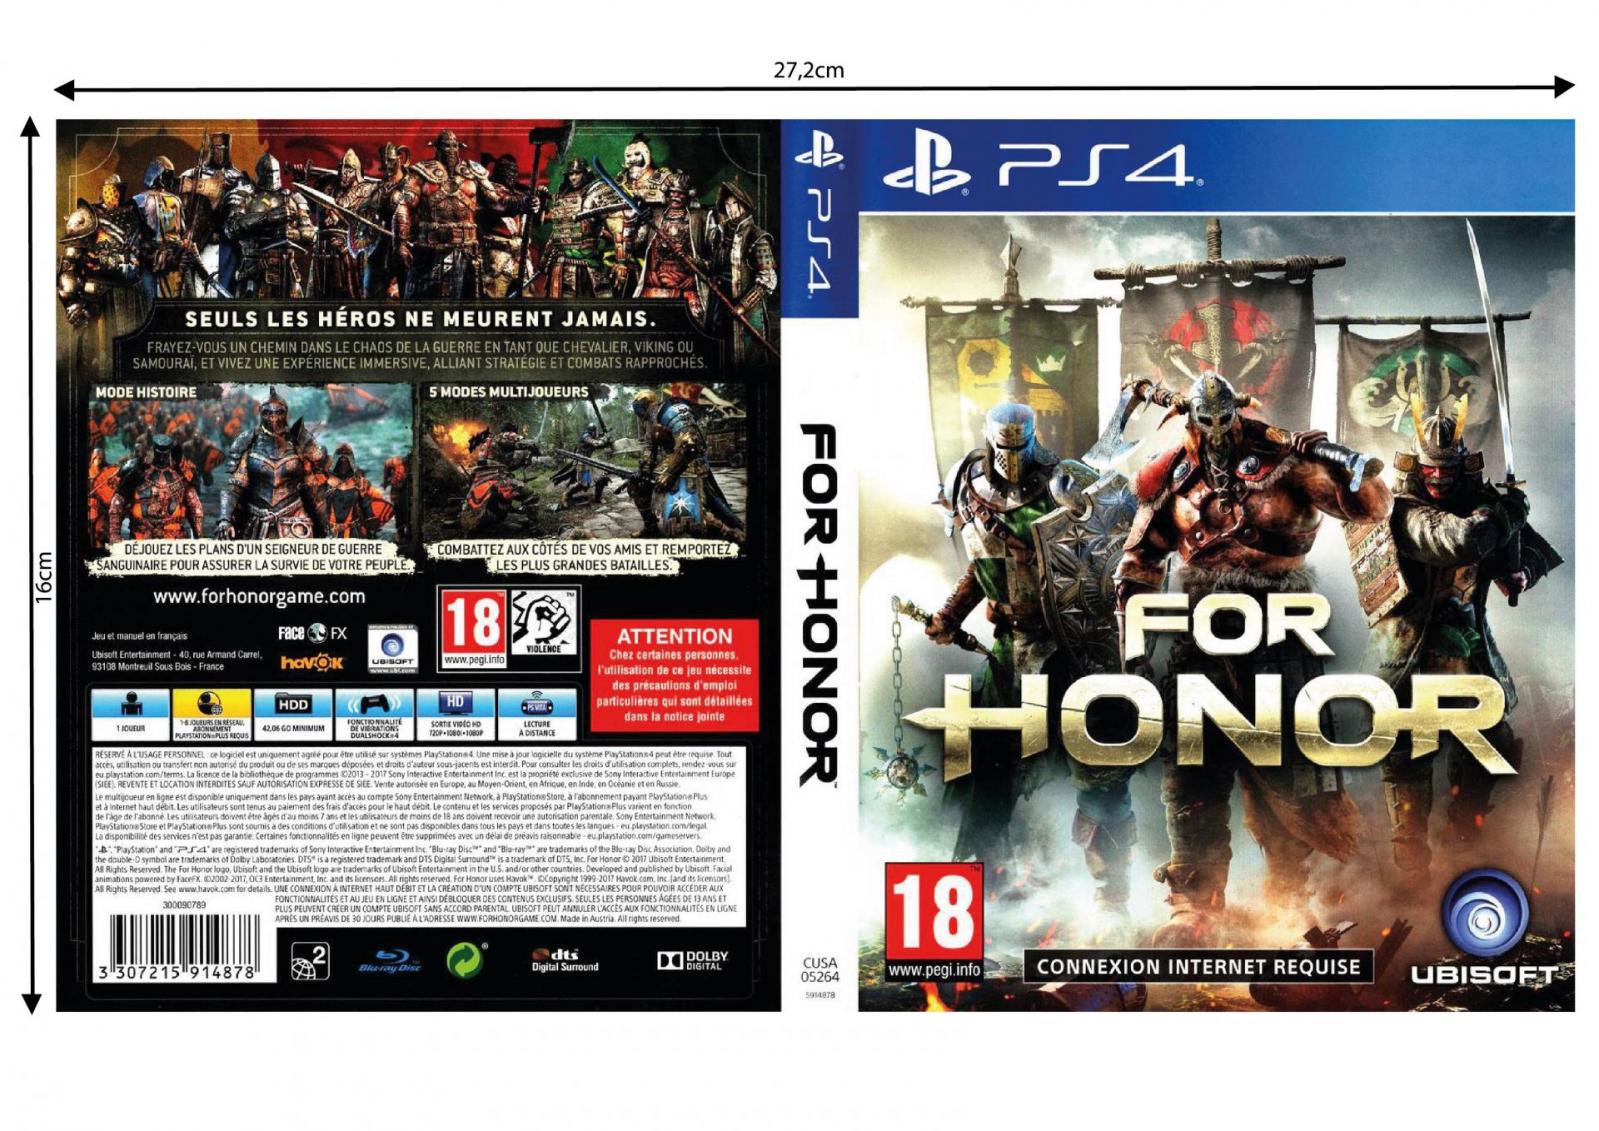 For honor 02